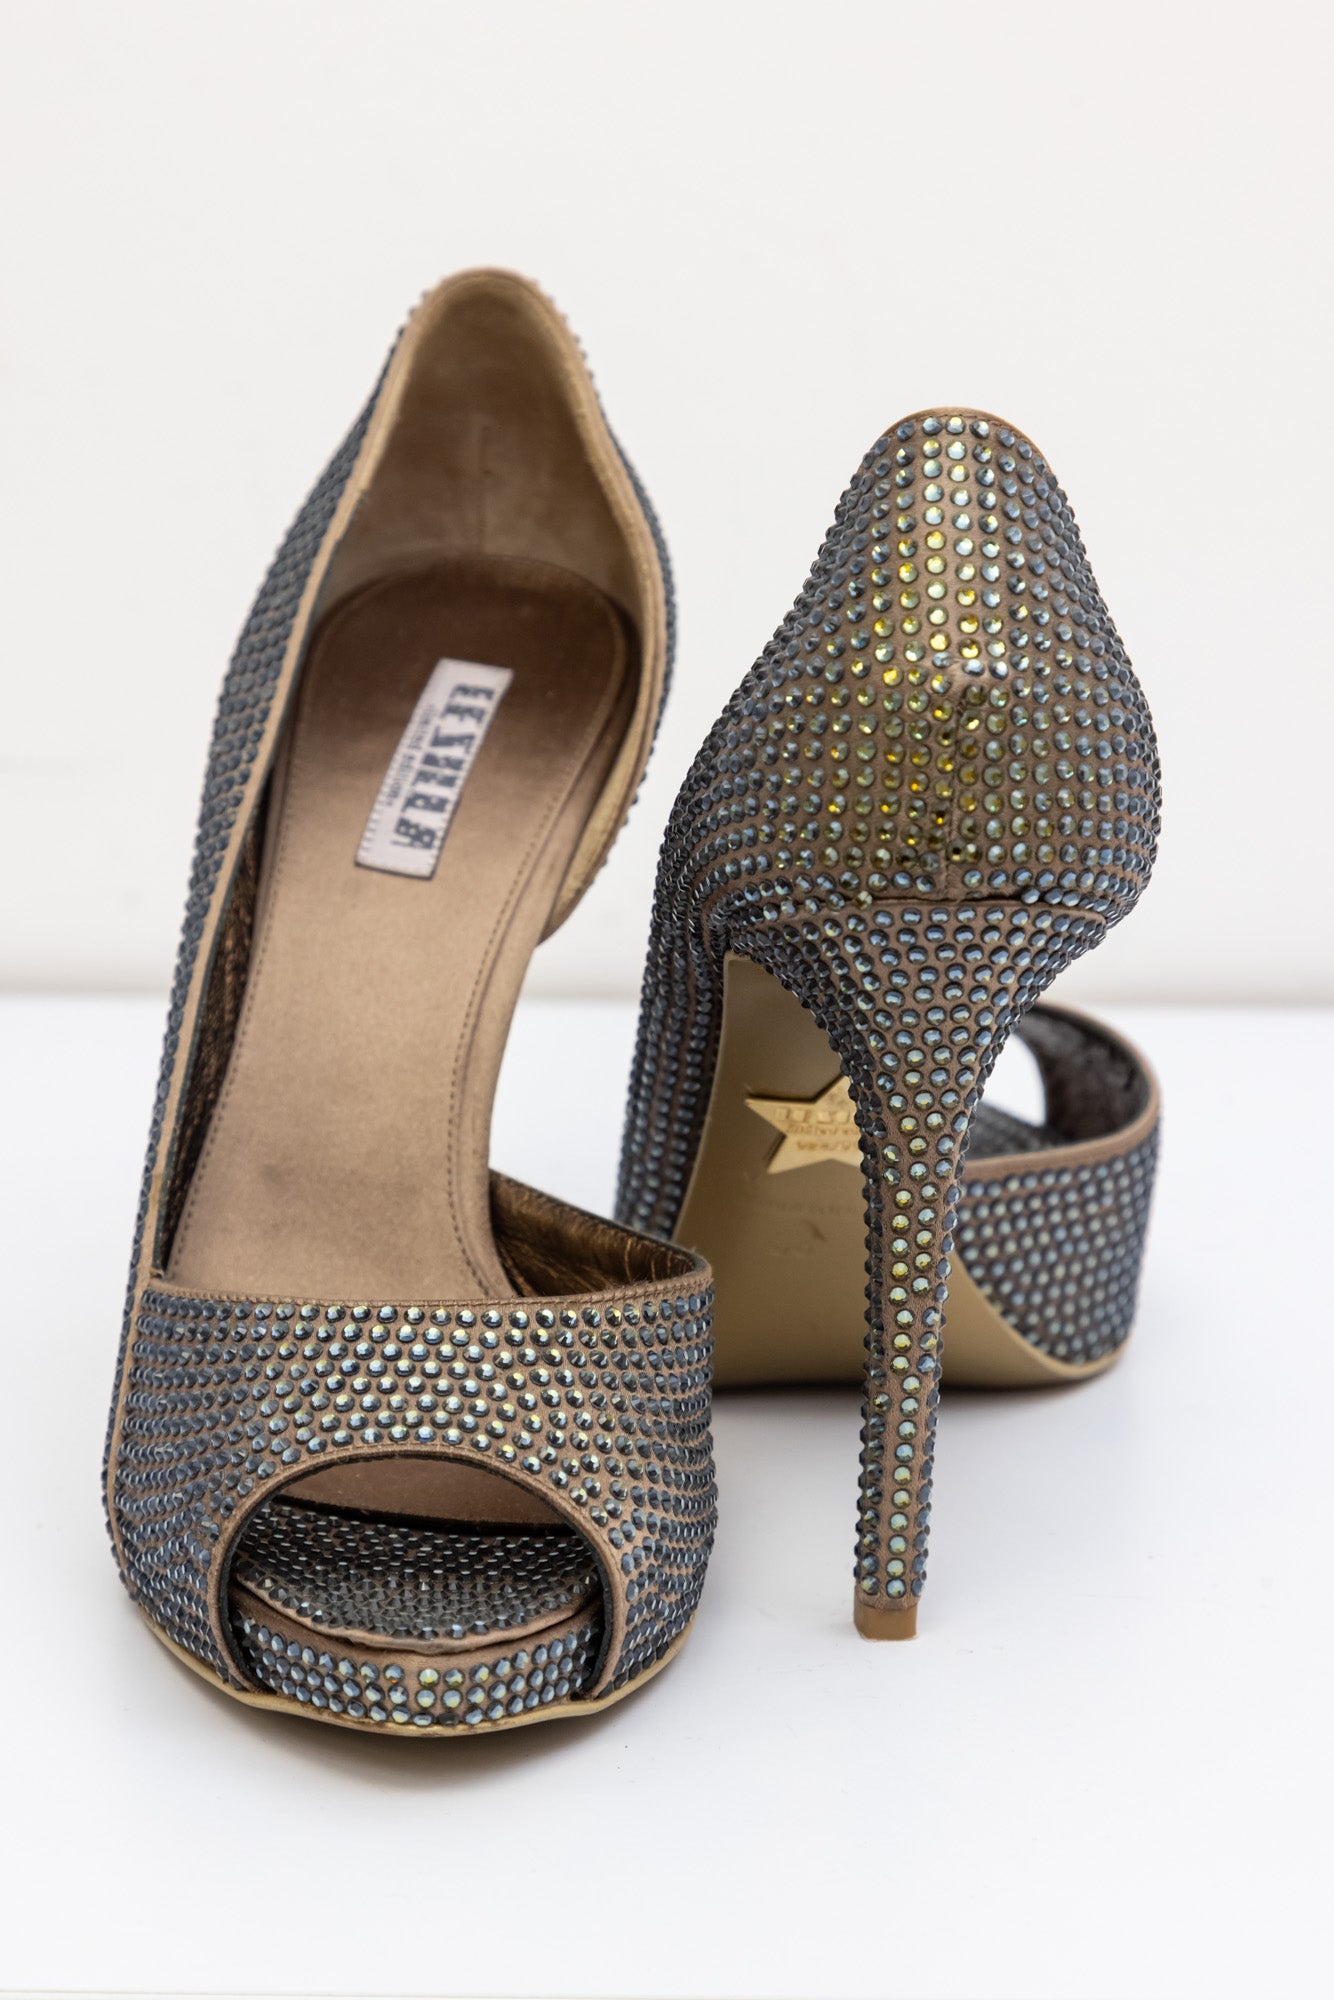 LE SILLA Crystal Embellished Gold Pumps - Limited Edition Open Toe (024/050)